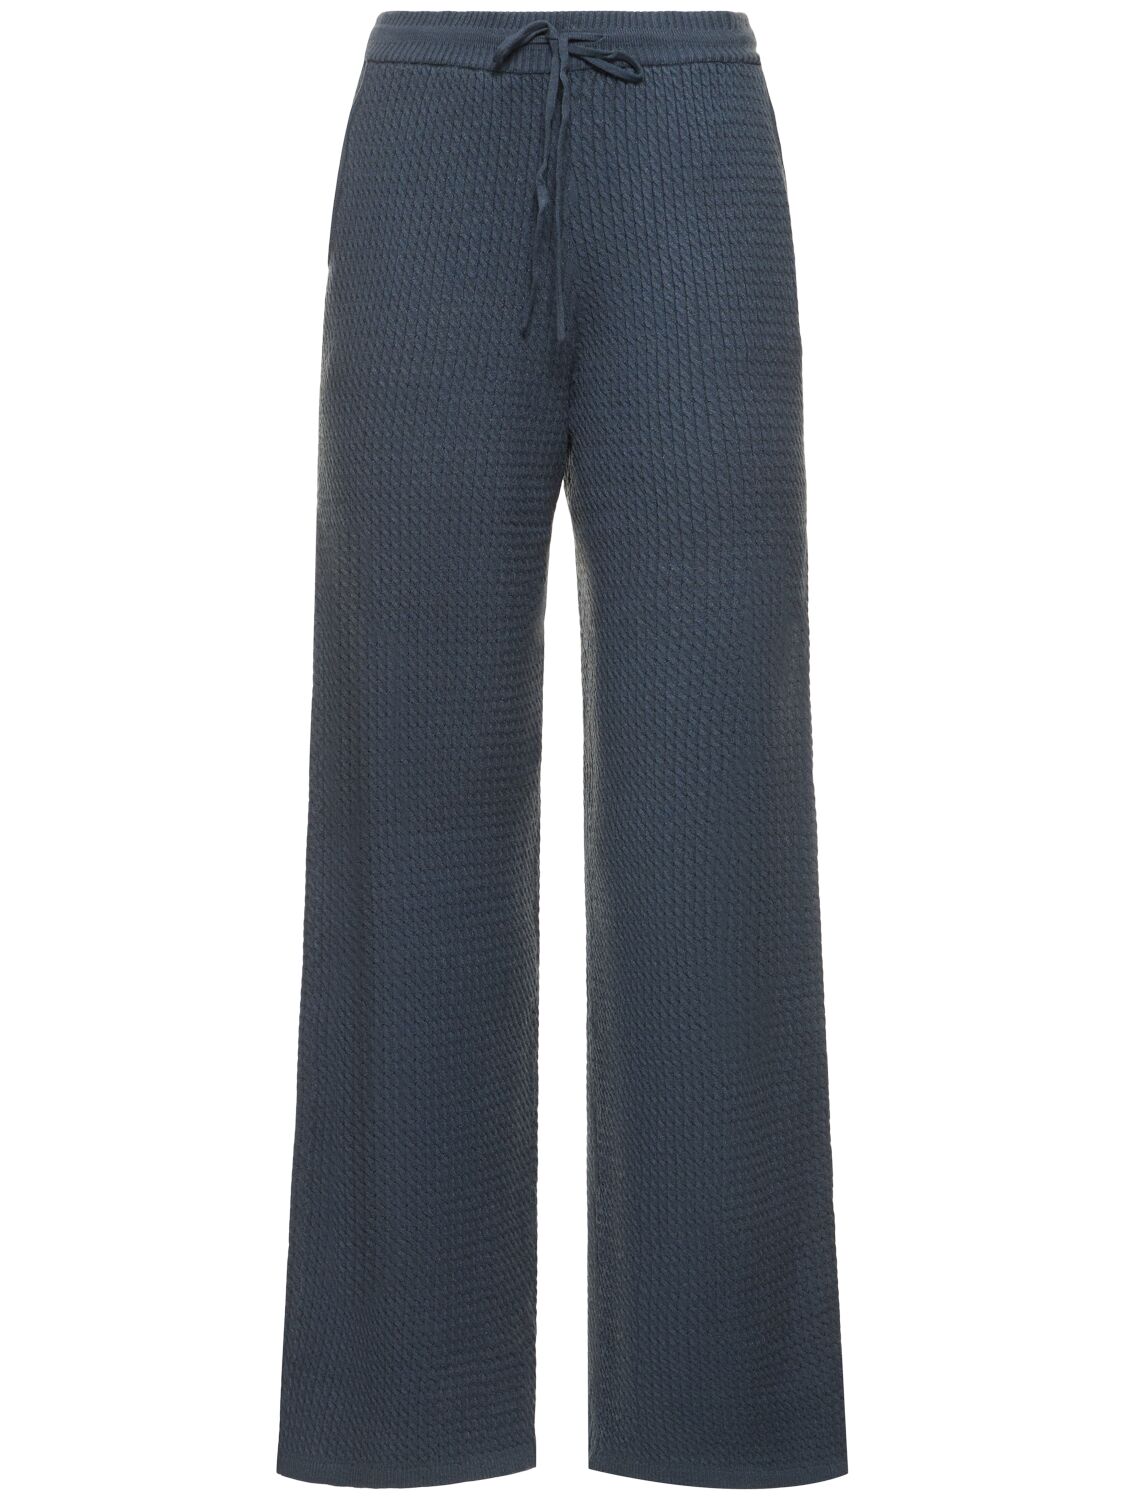 Image of Pull On Knit Viscose Blend Pants